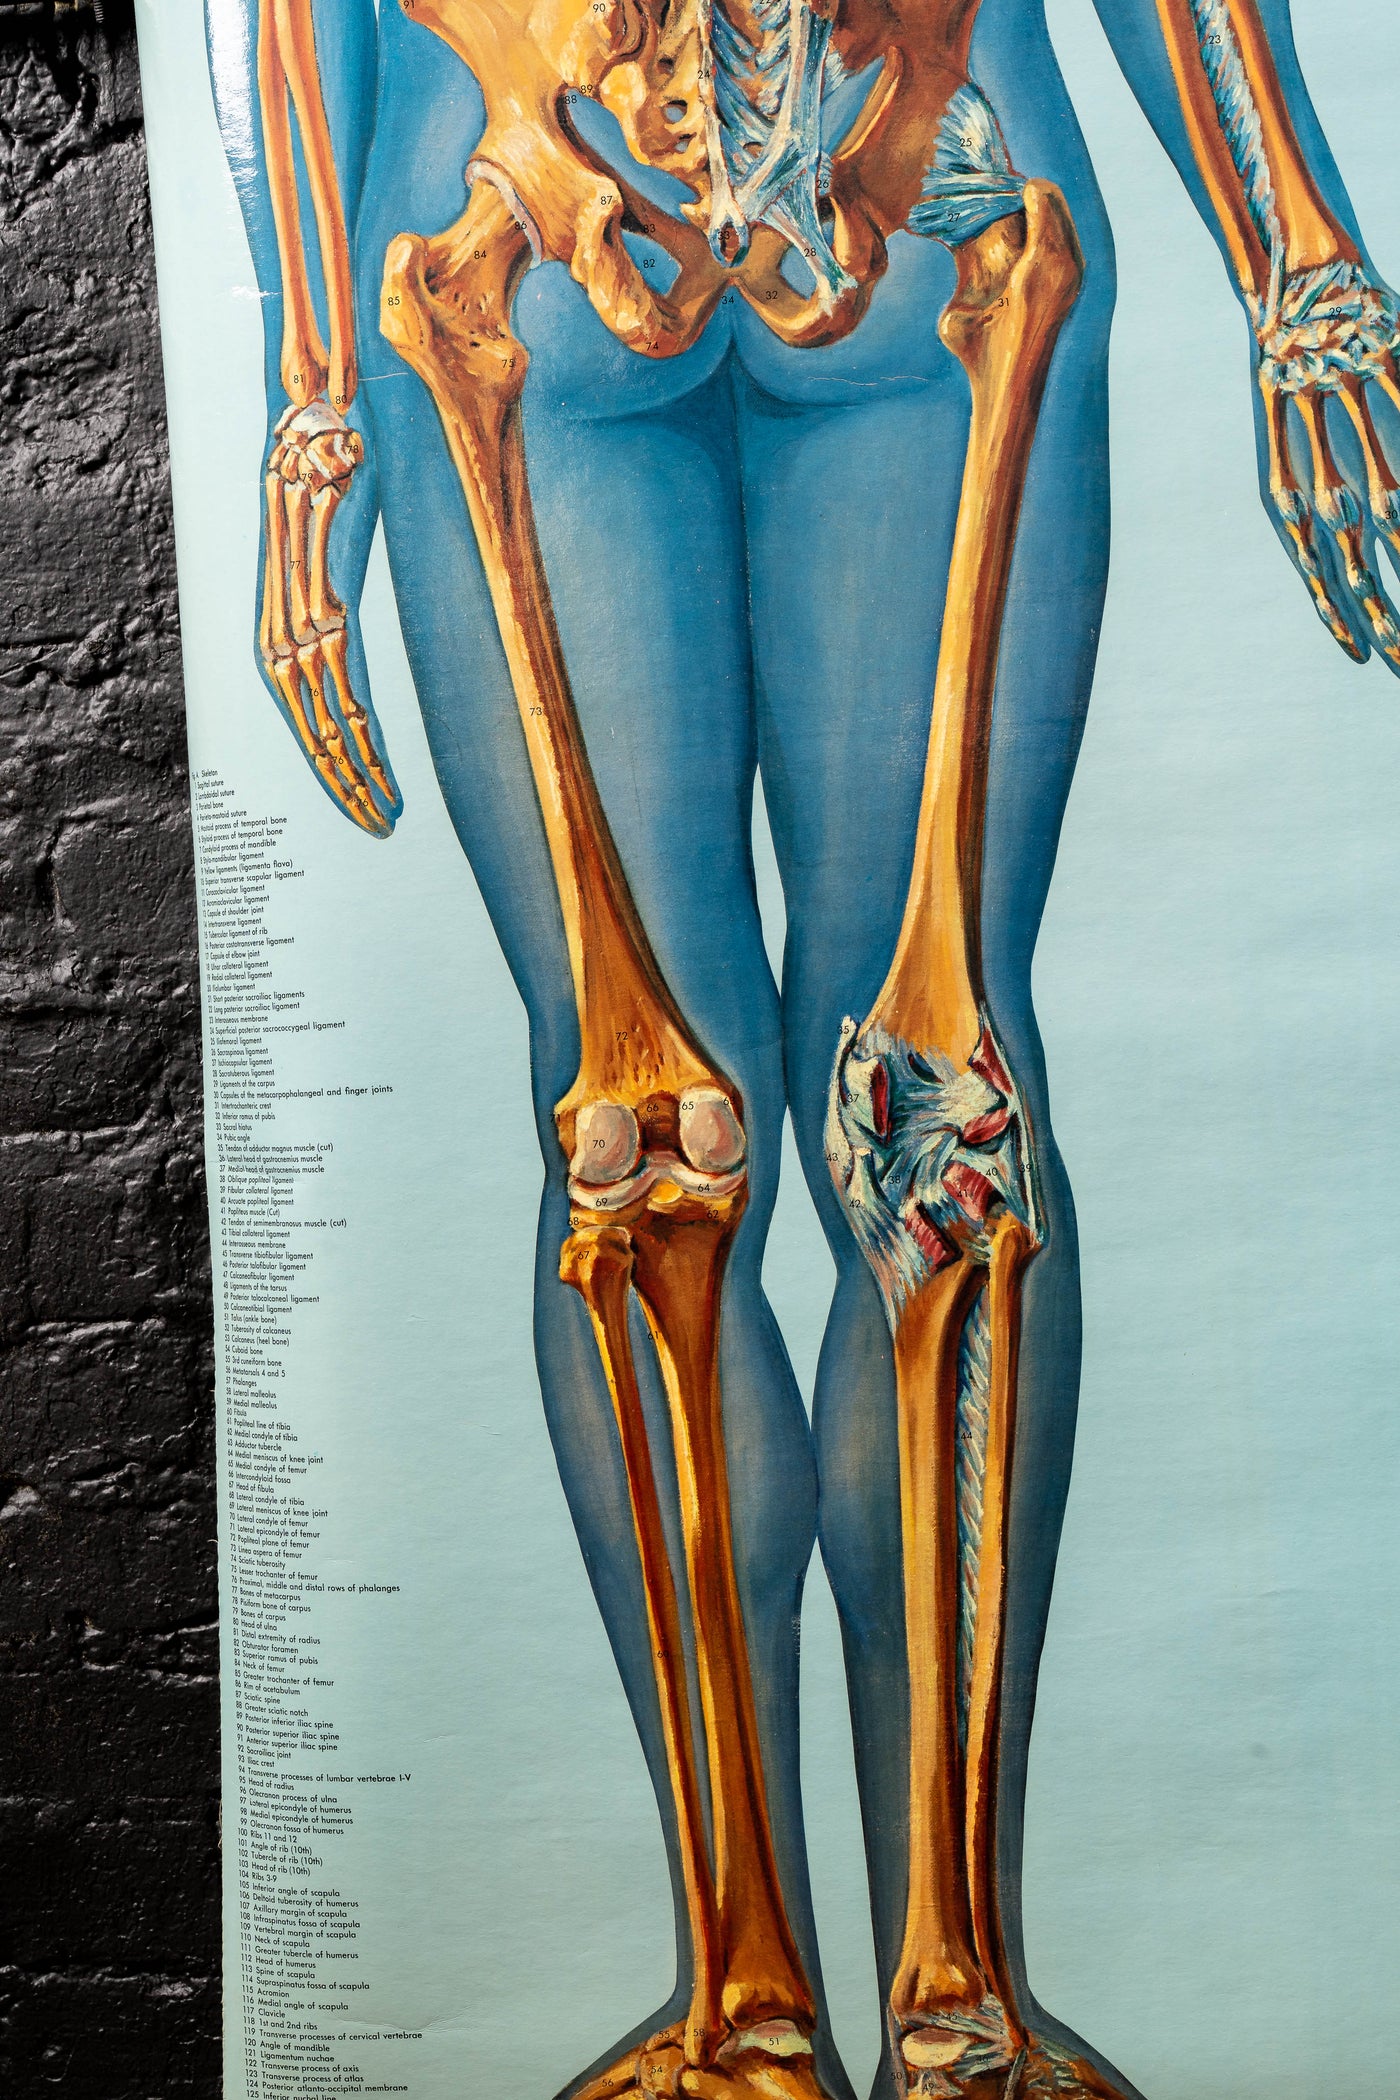 c. 1960s Skeleton and Back Muscle Anatomy Chart